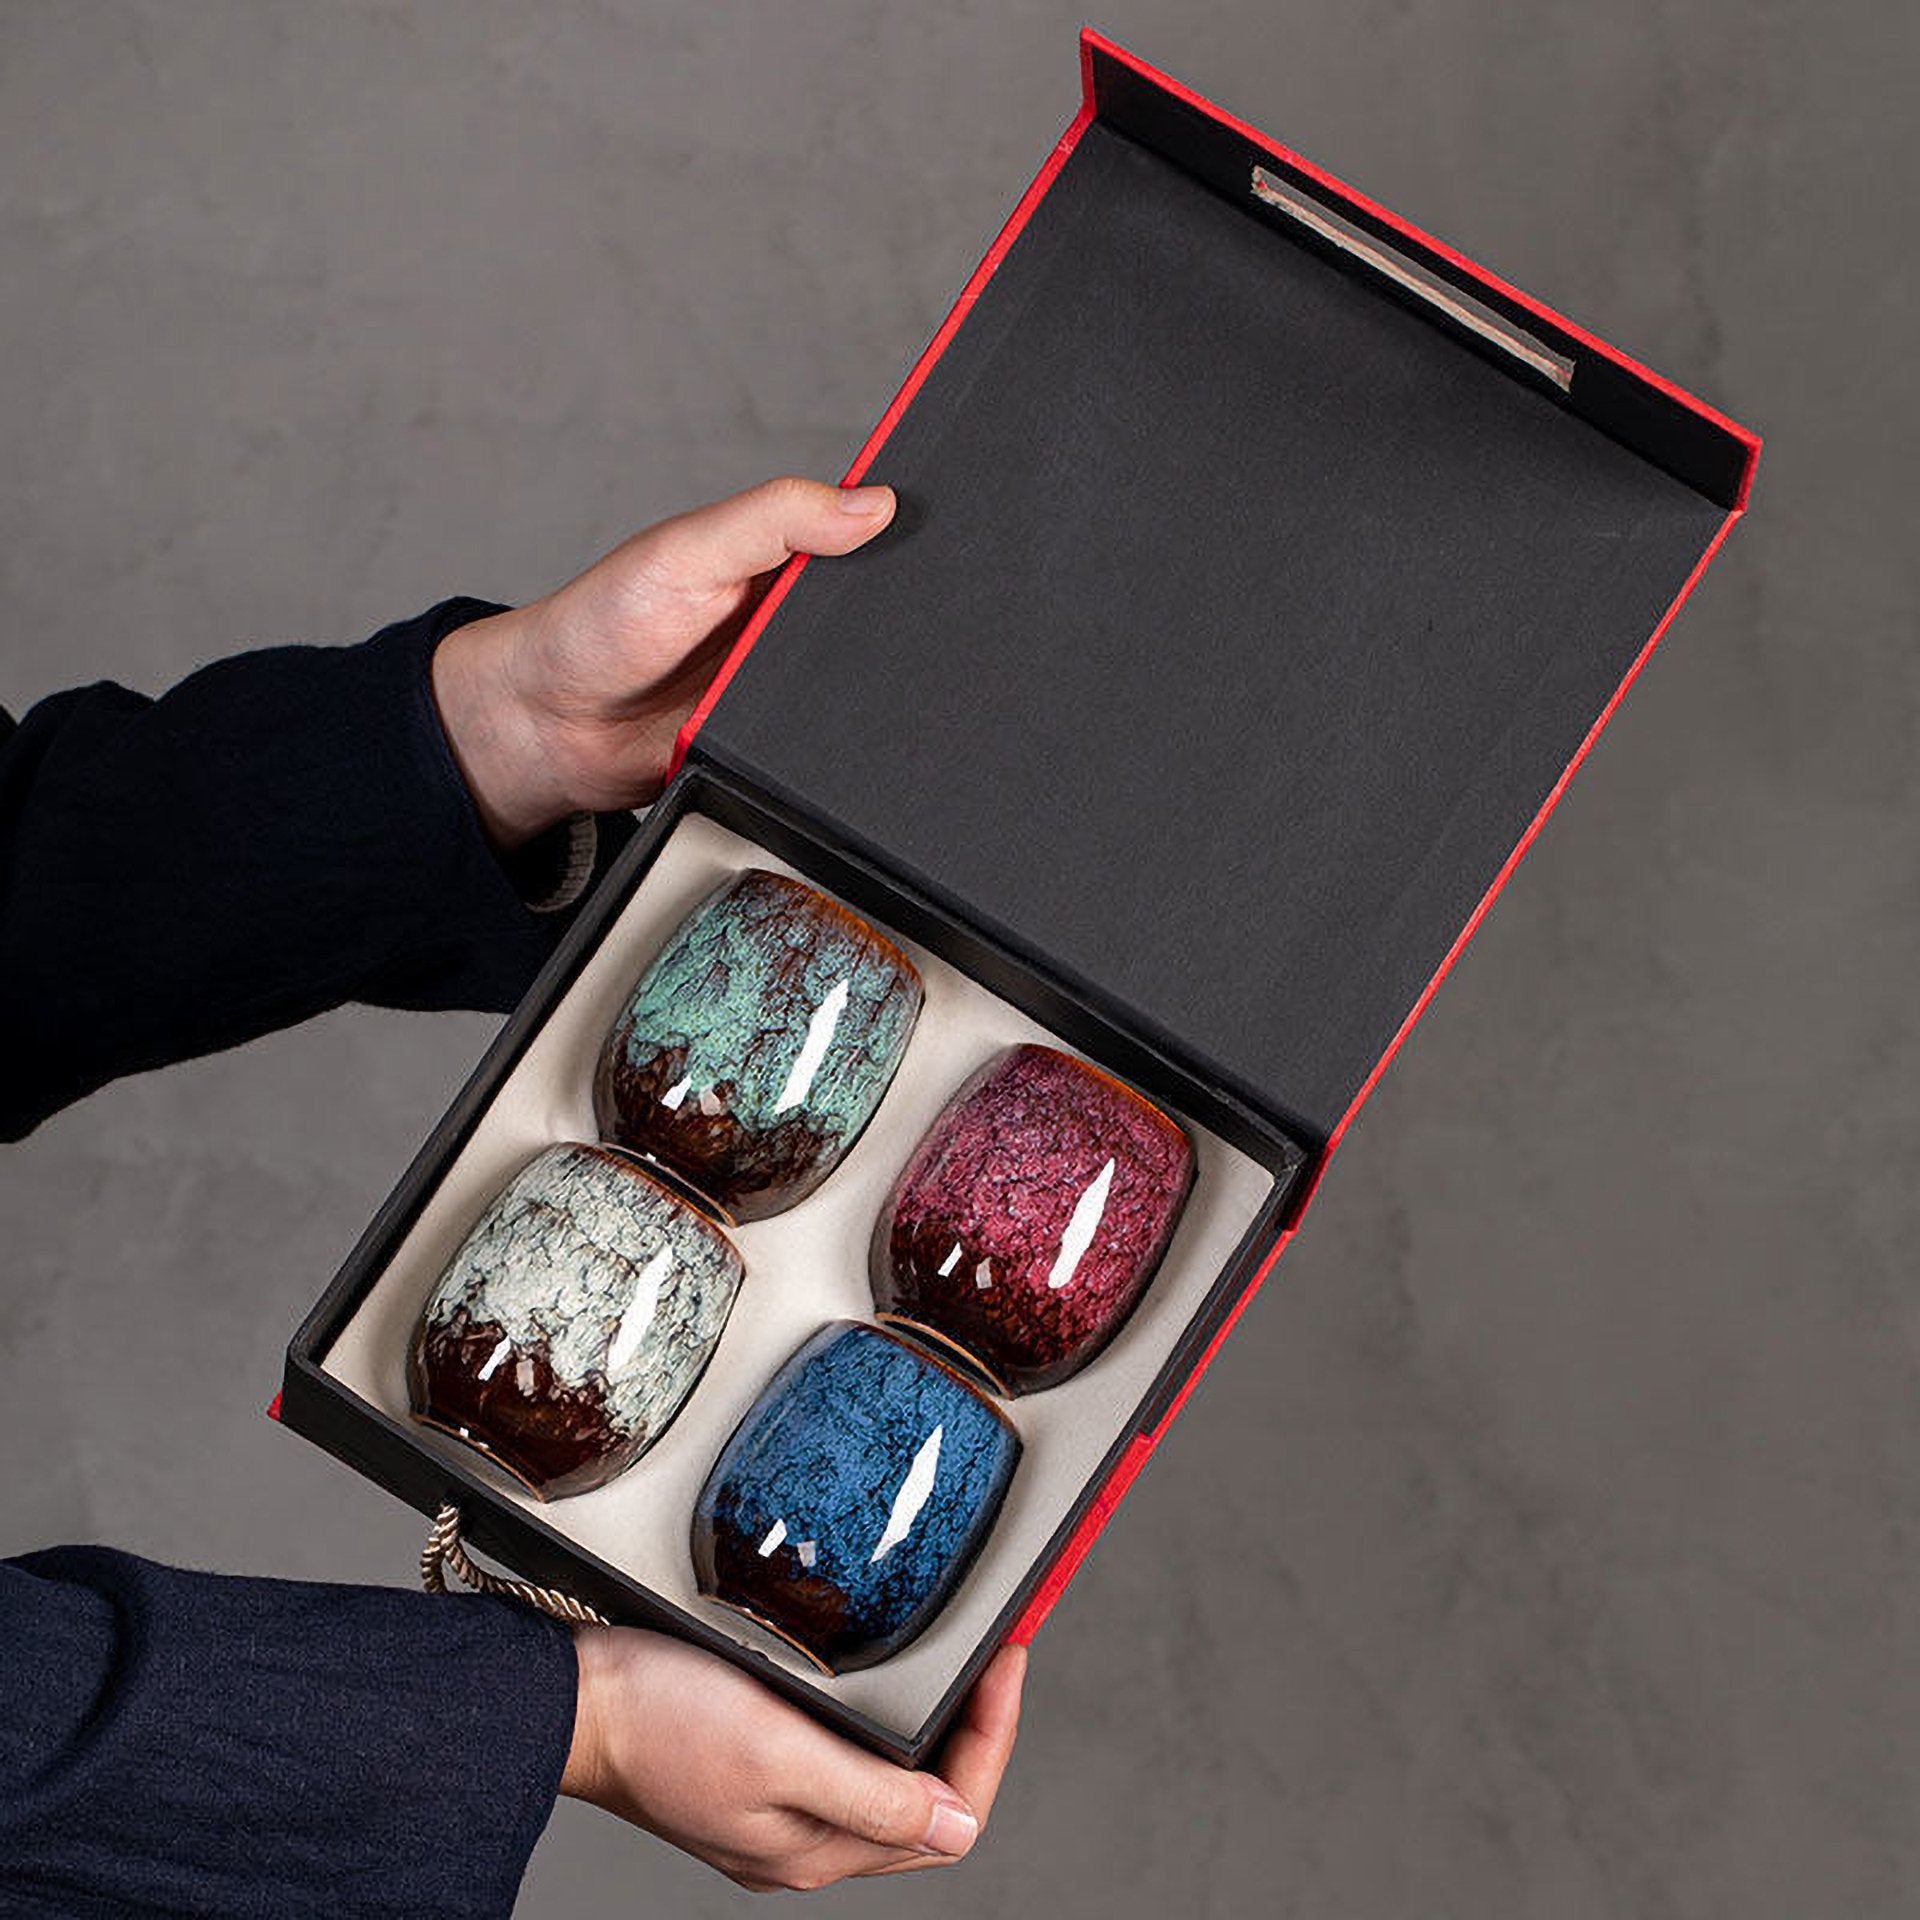 Hand holding open box containing four unique glazed teacups in rich, earthy tones.